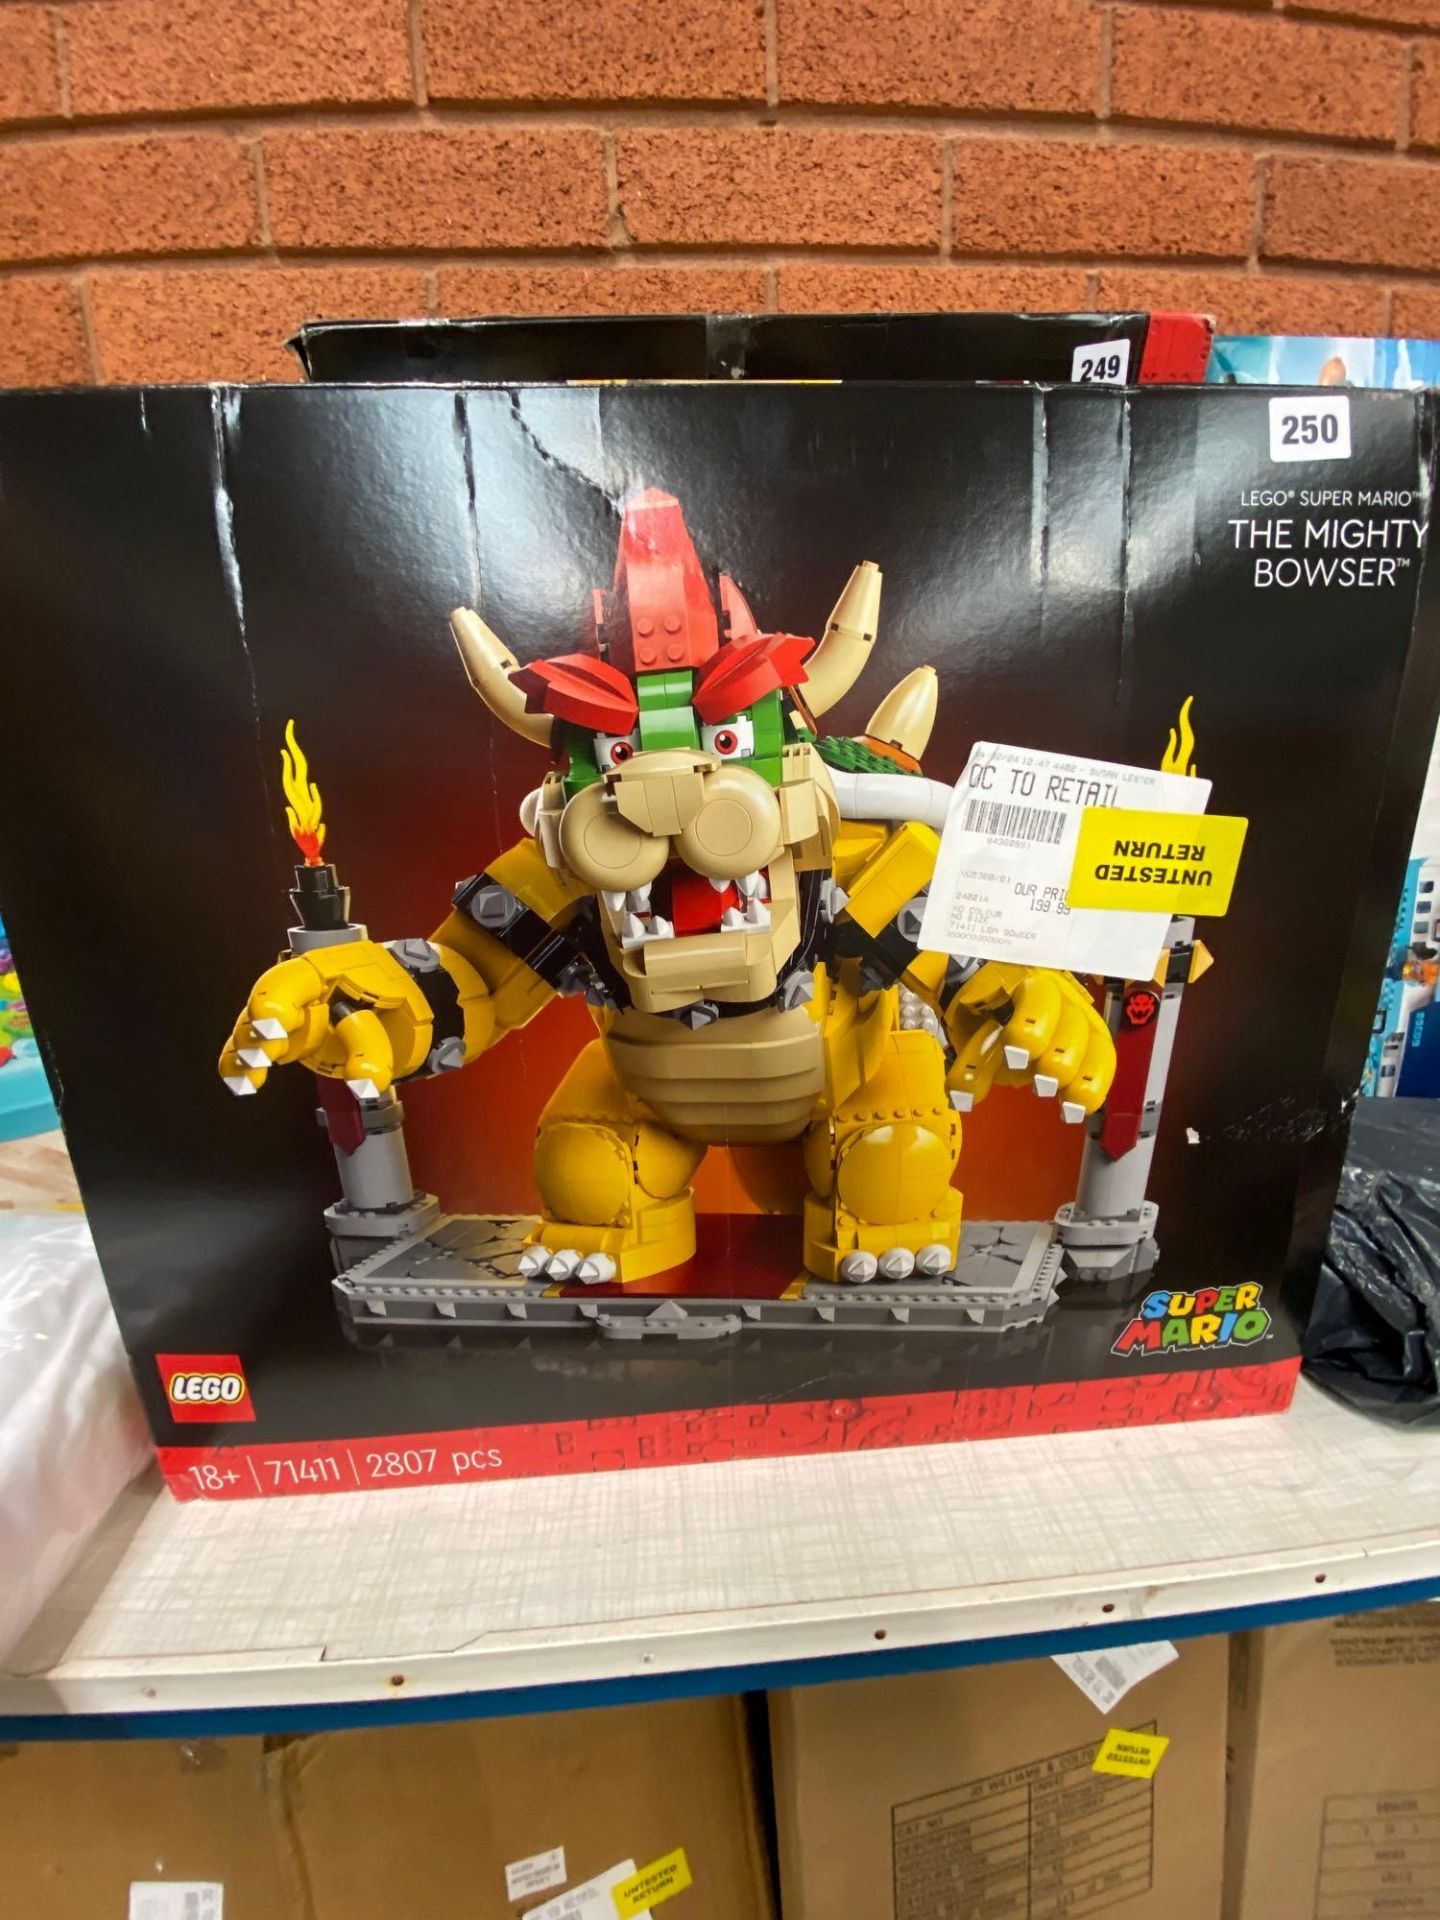 RRP £229.99 - LEGO 71411 Super Mario The Mighty Bowser, 3D Model Building Kit VD5300 01 - Image 2 of 2